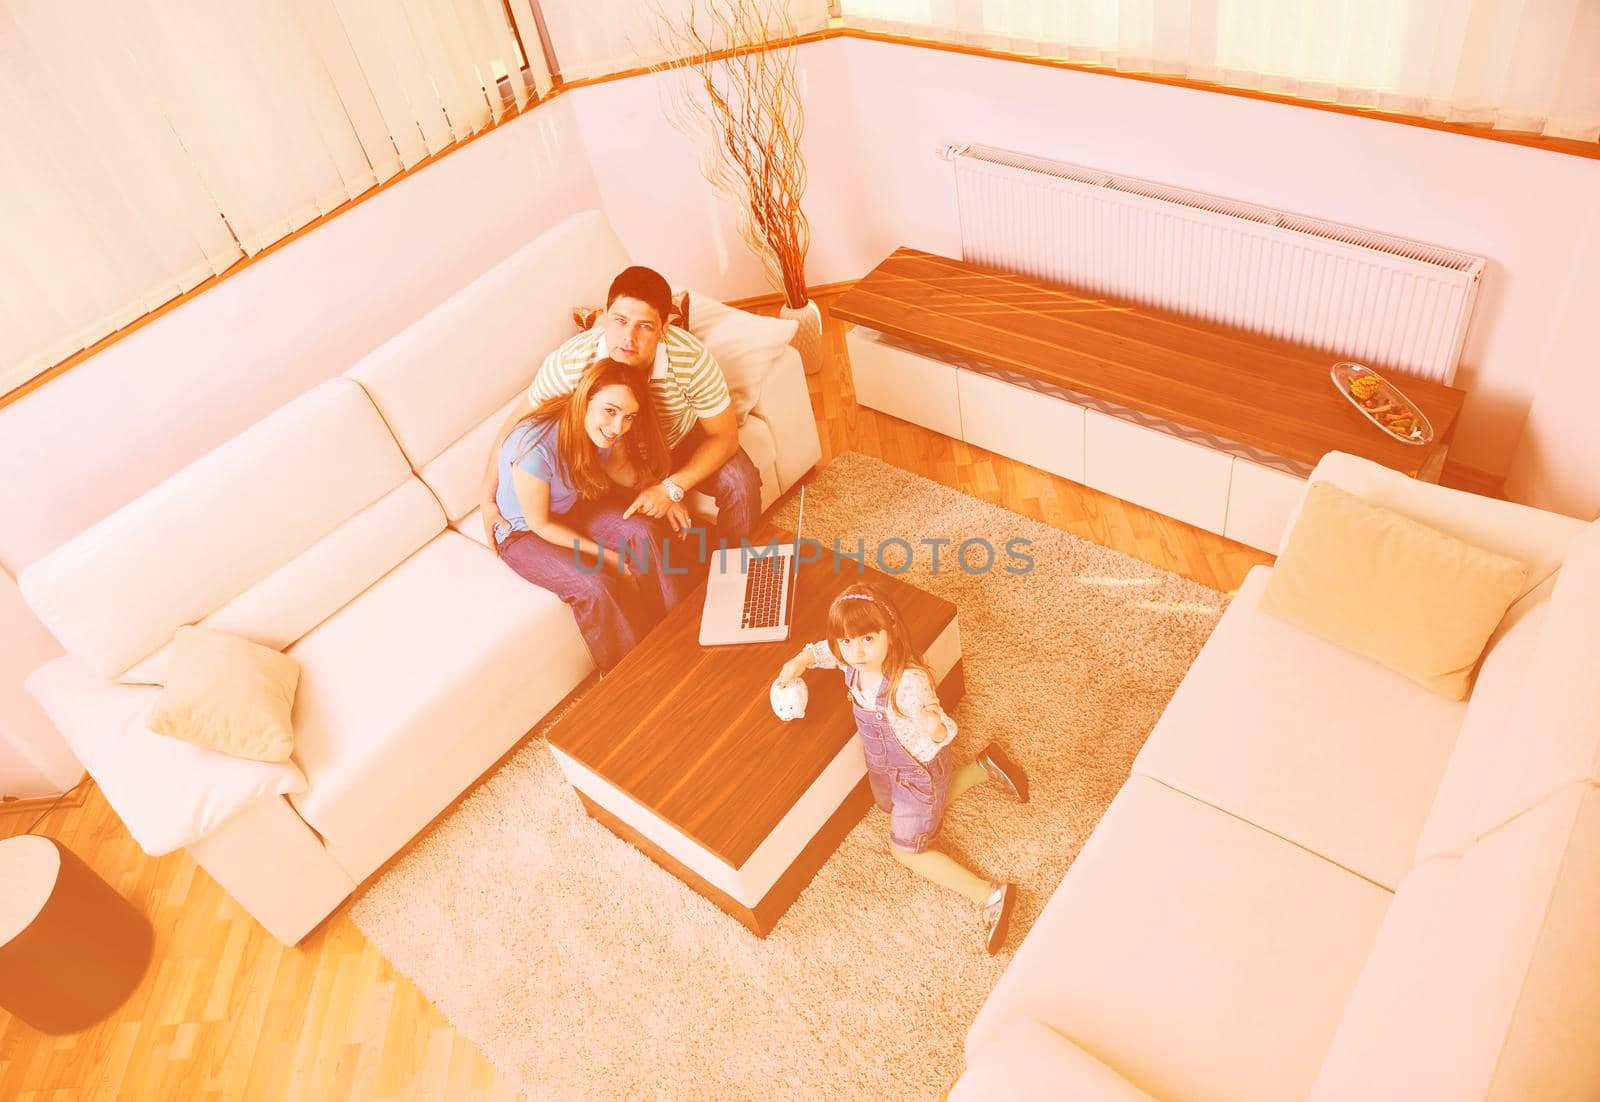 young happy family at bright and modern living room puting money in piggy bank and working on laptop computer on home finance